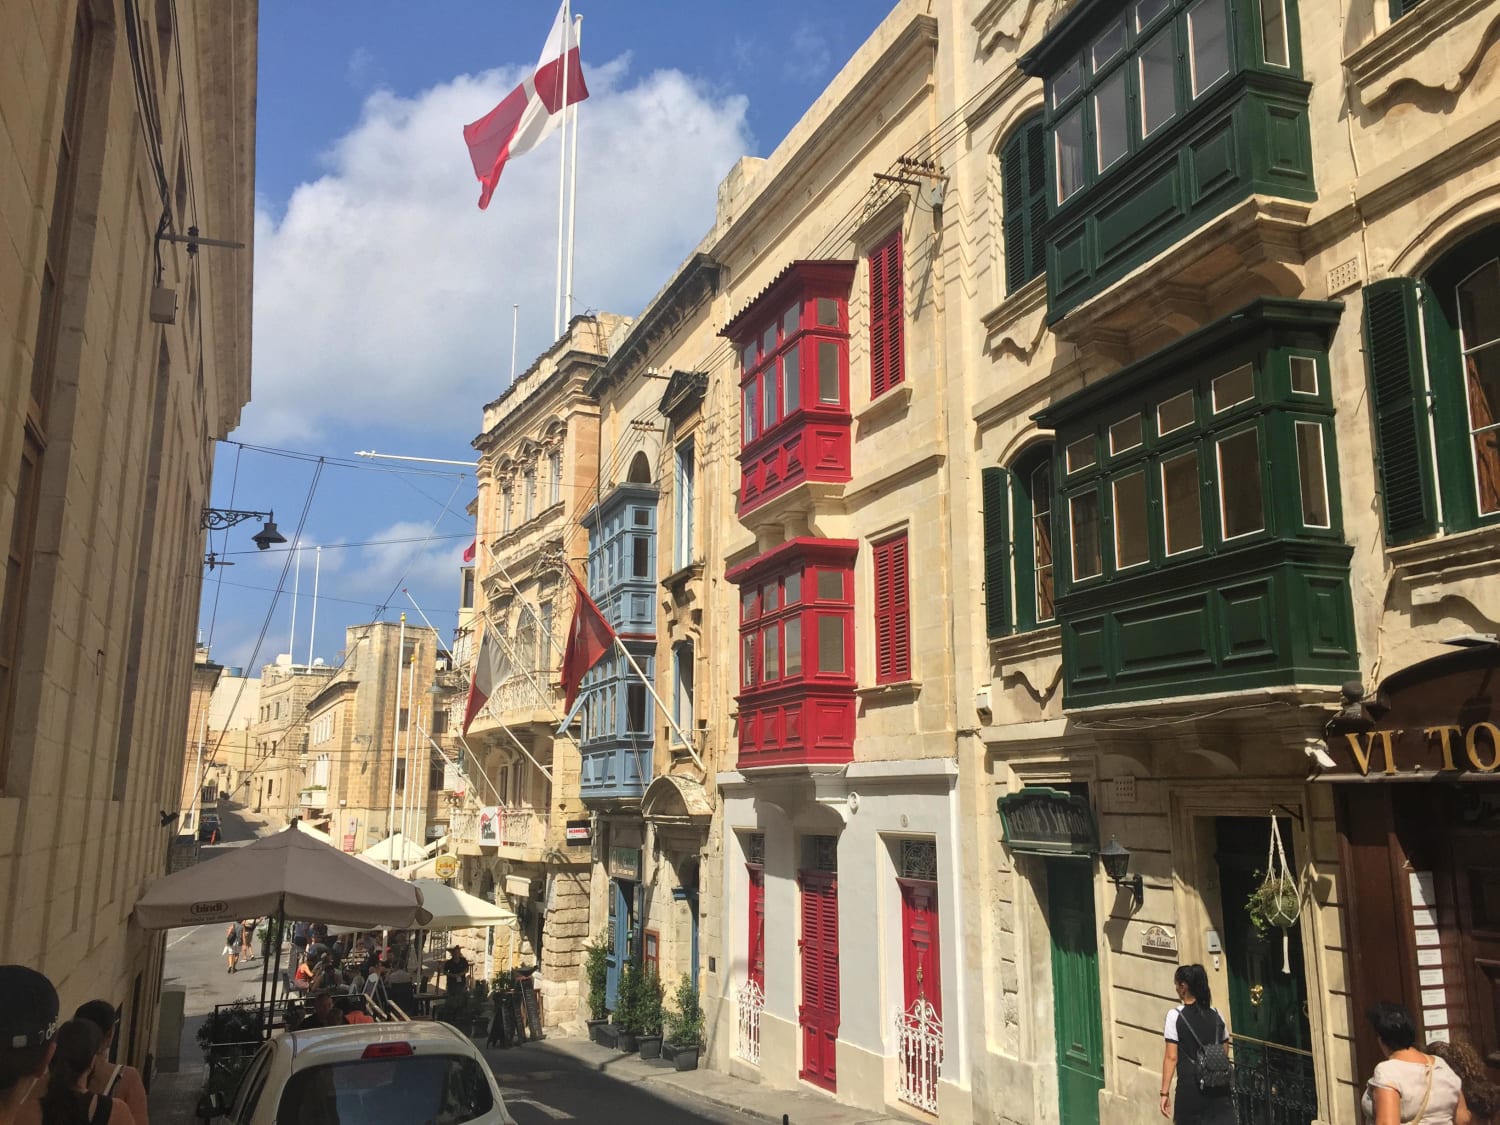 These balconies in Malta